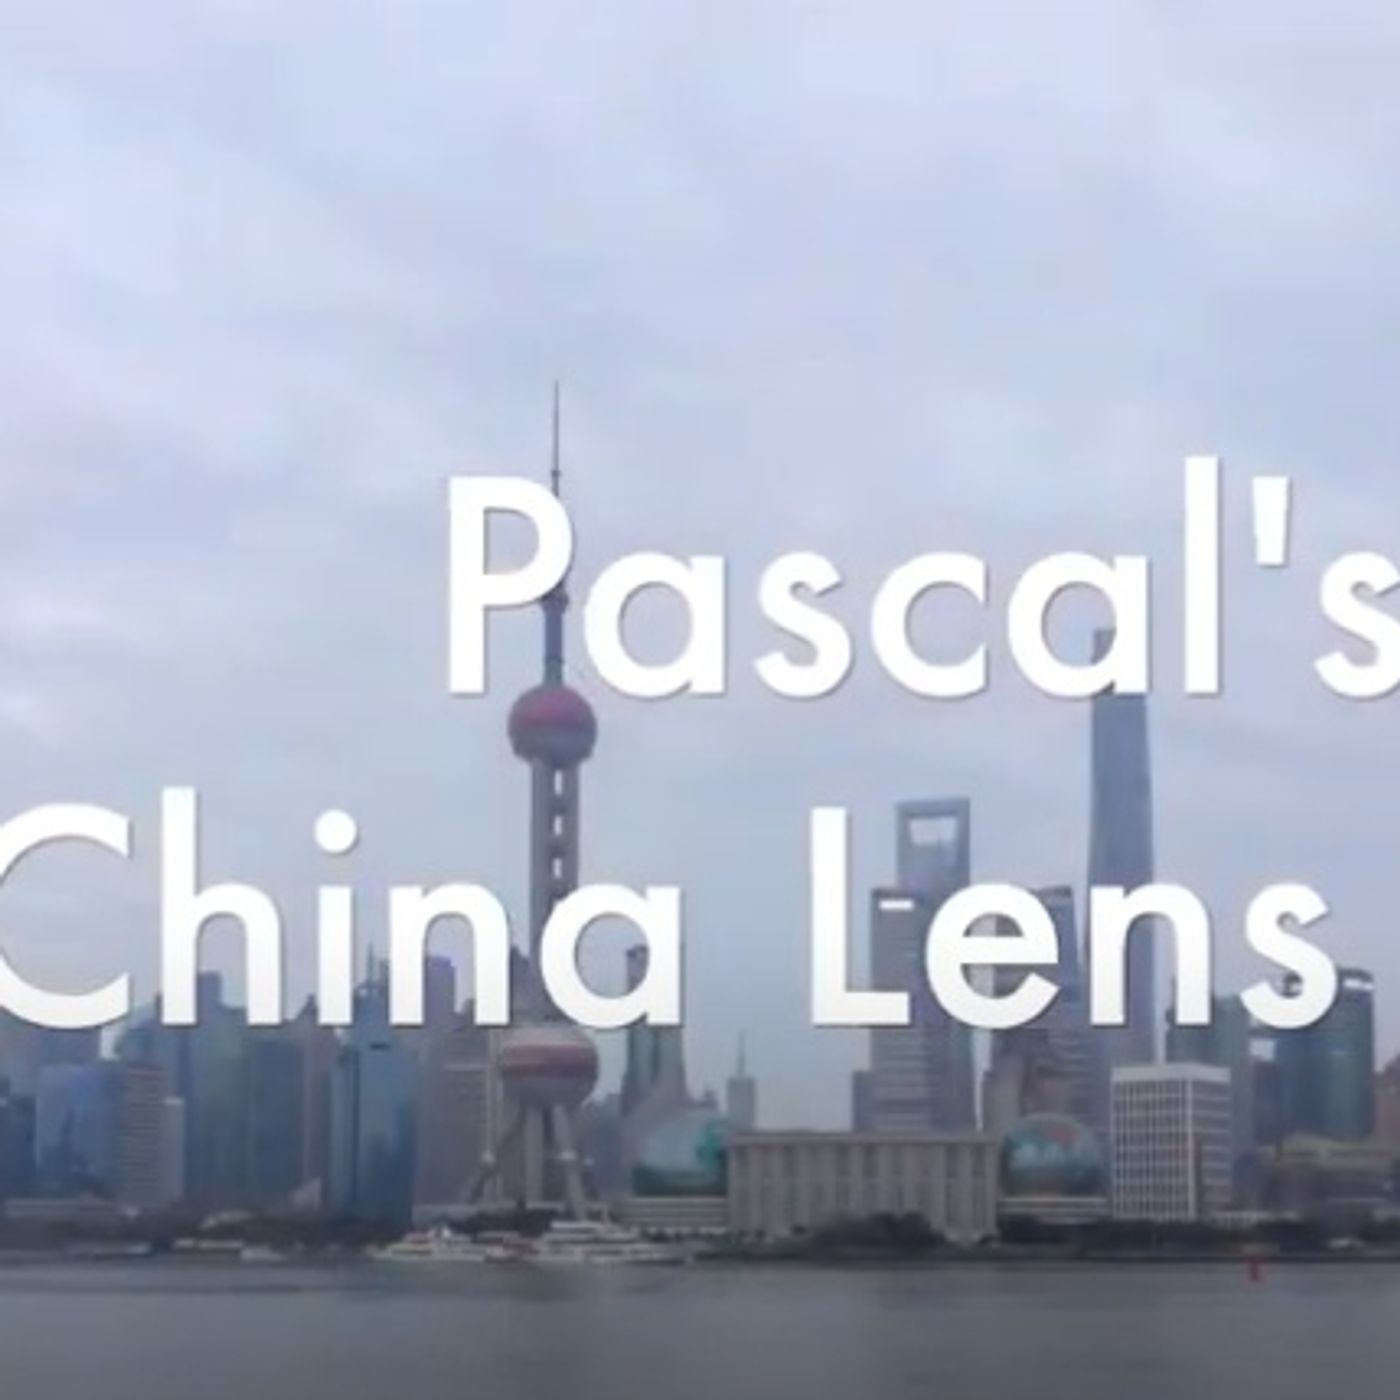 Can India become the next China? Pascal's China Lens_10/02/2022